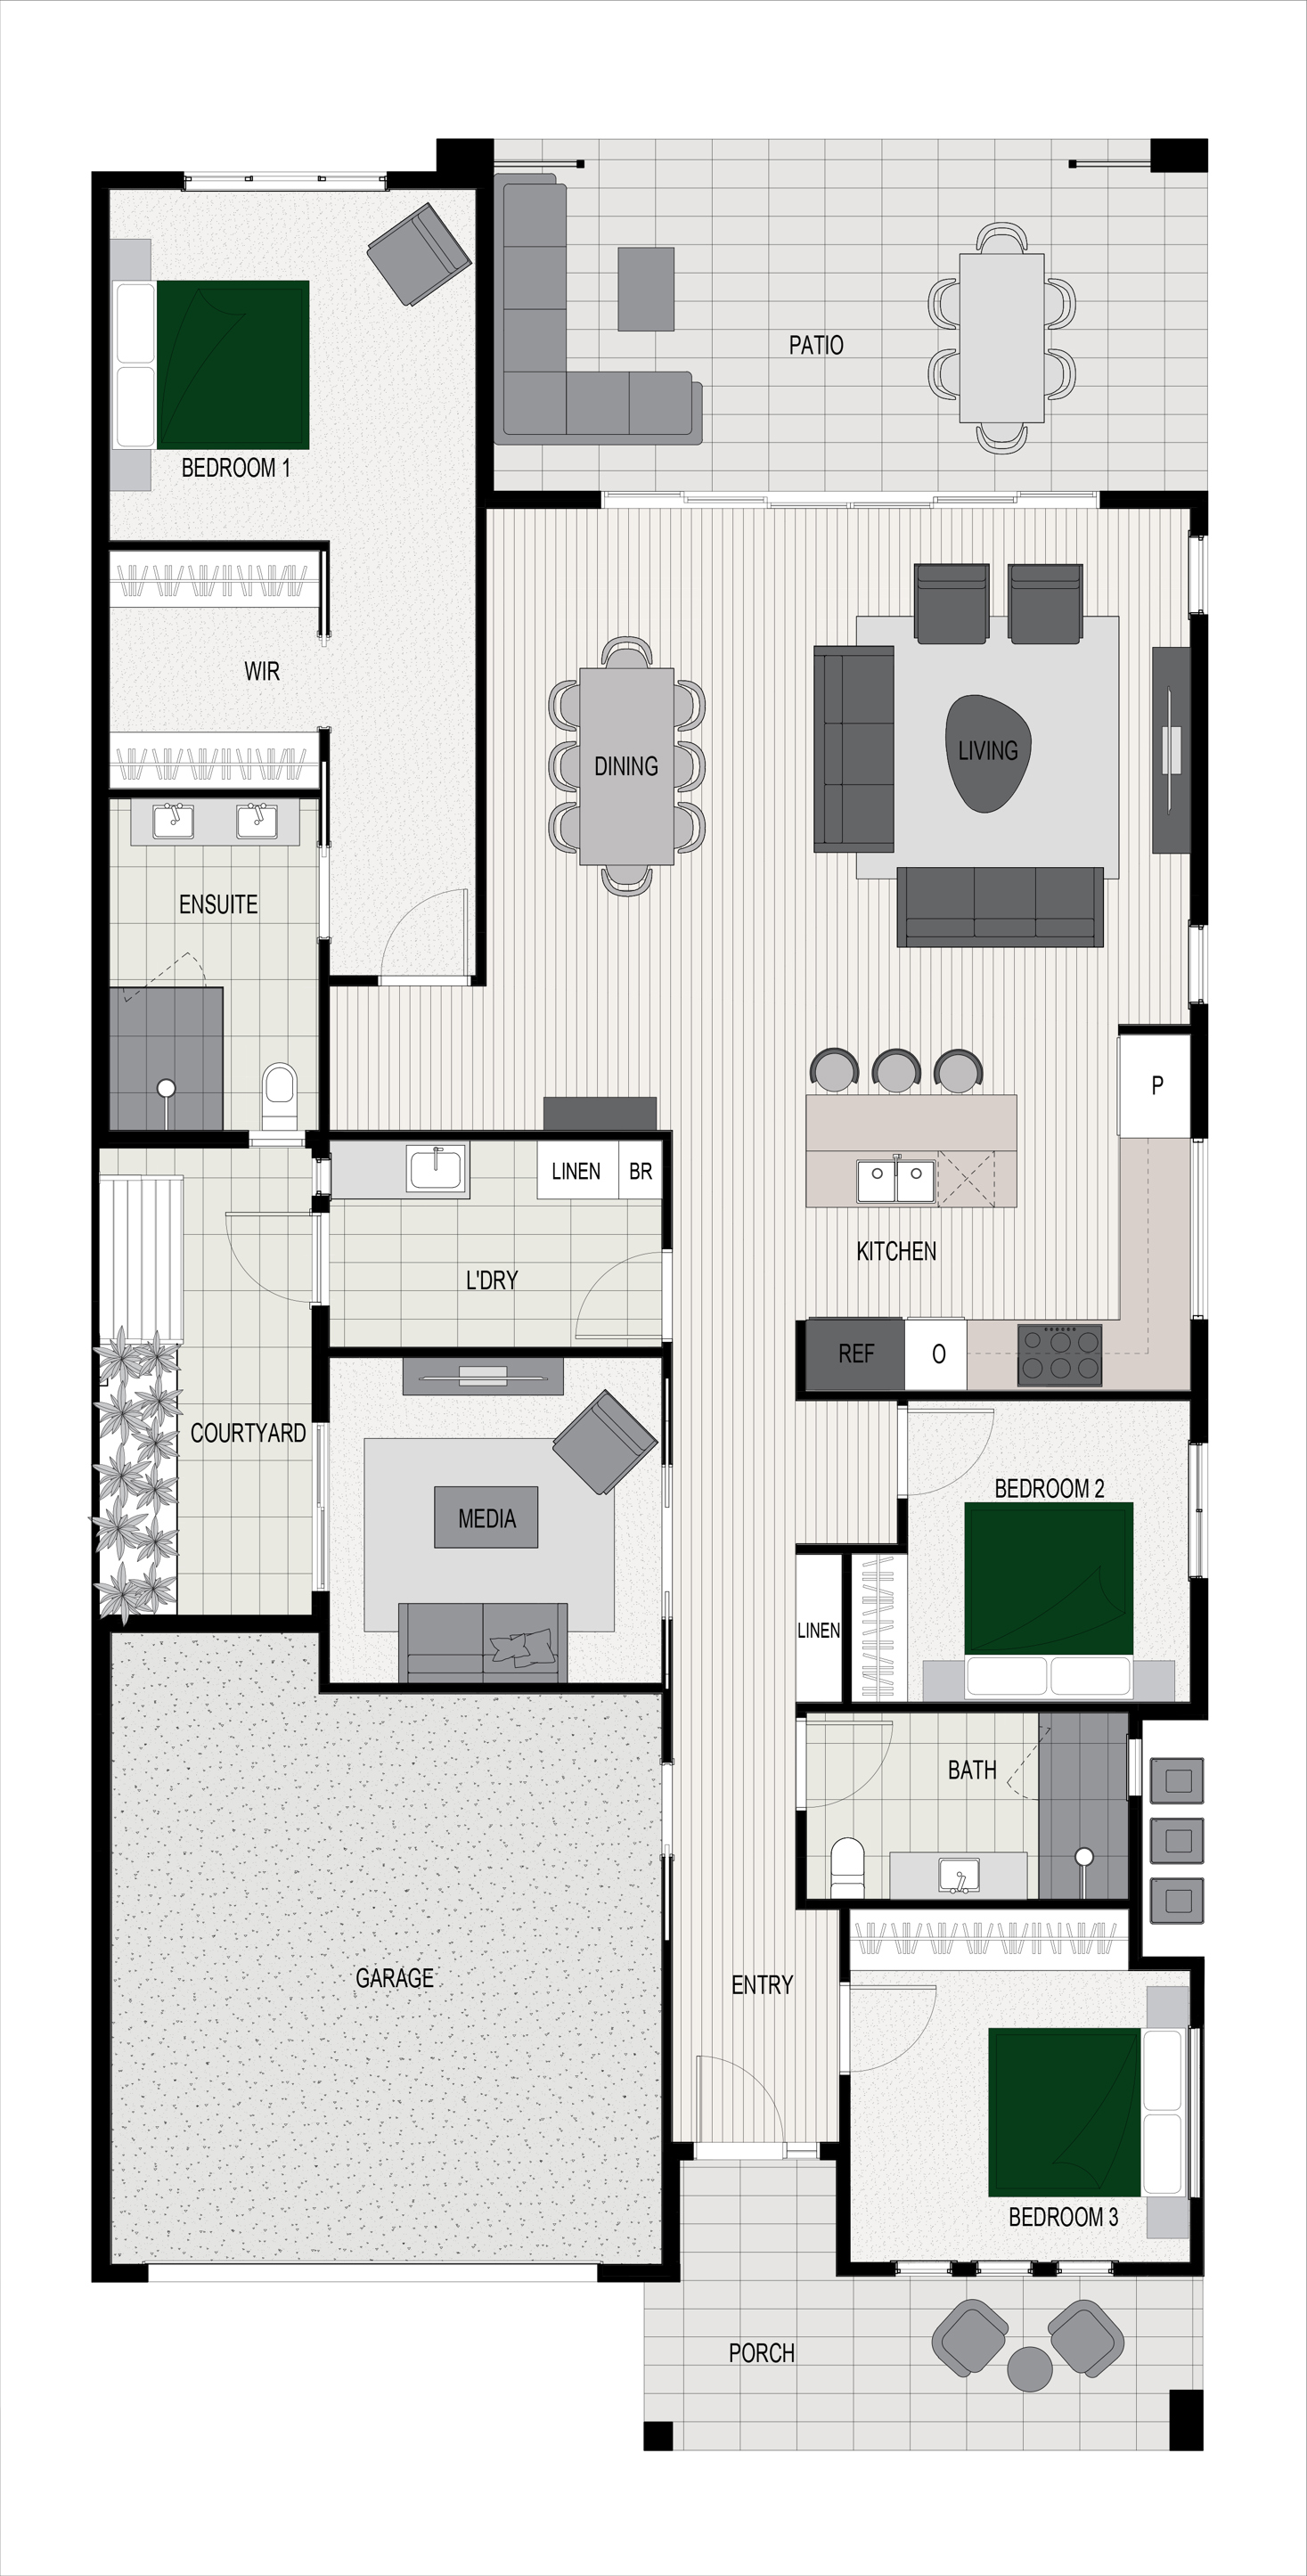 Floor plan of the Kimberley S6 house design, located at Stockland Halcyon Gables in The Hills district.